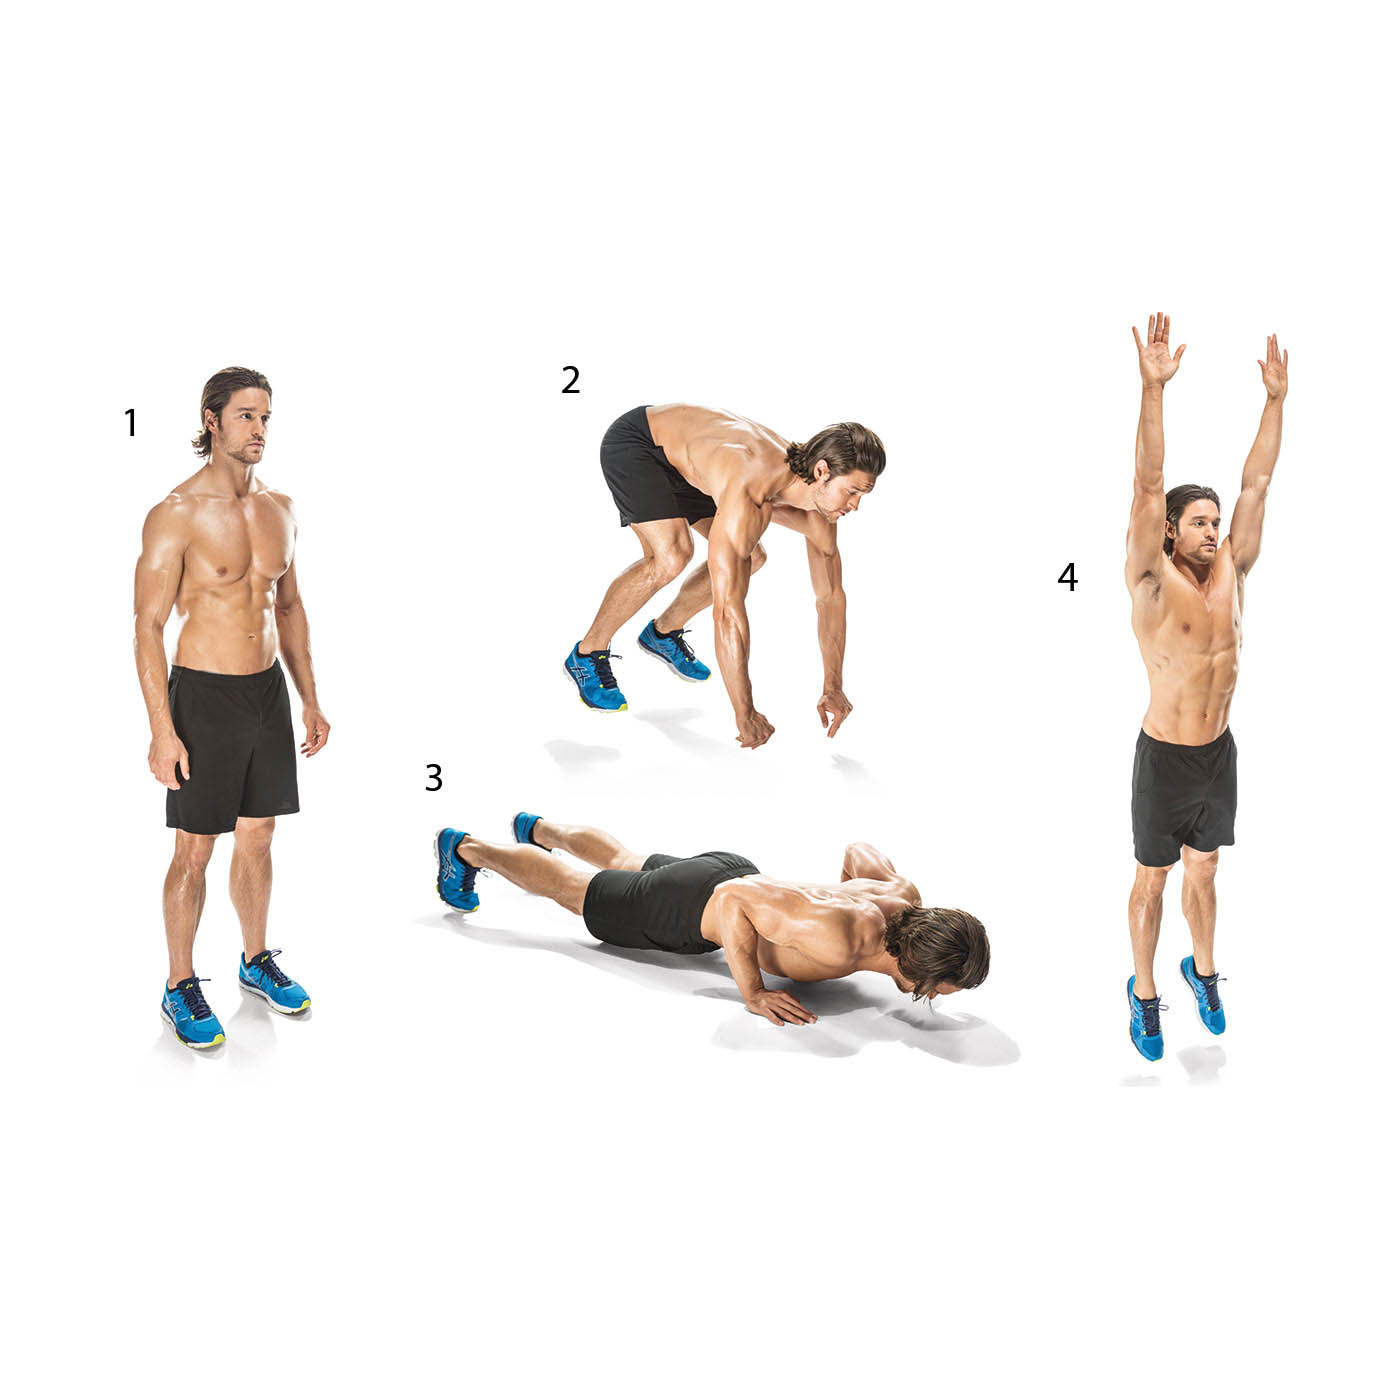 Burpee Exercise Video Guide | Muscle & Fitness